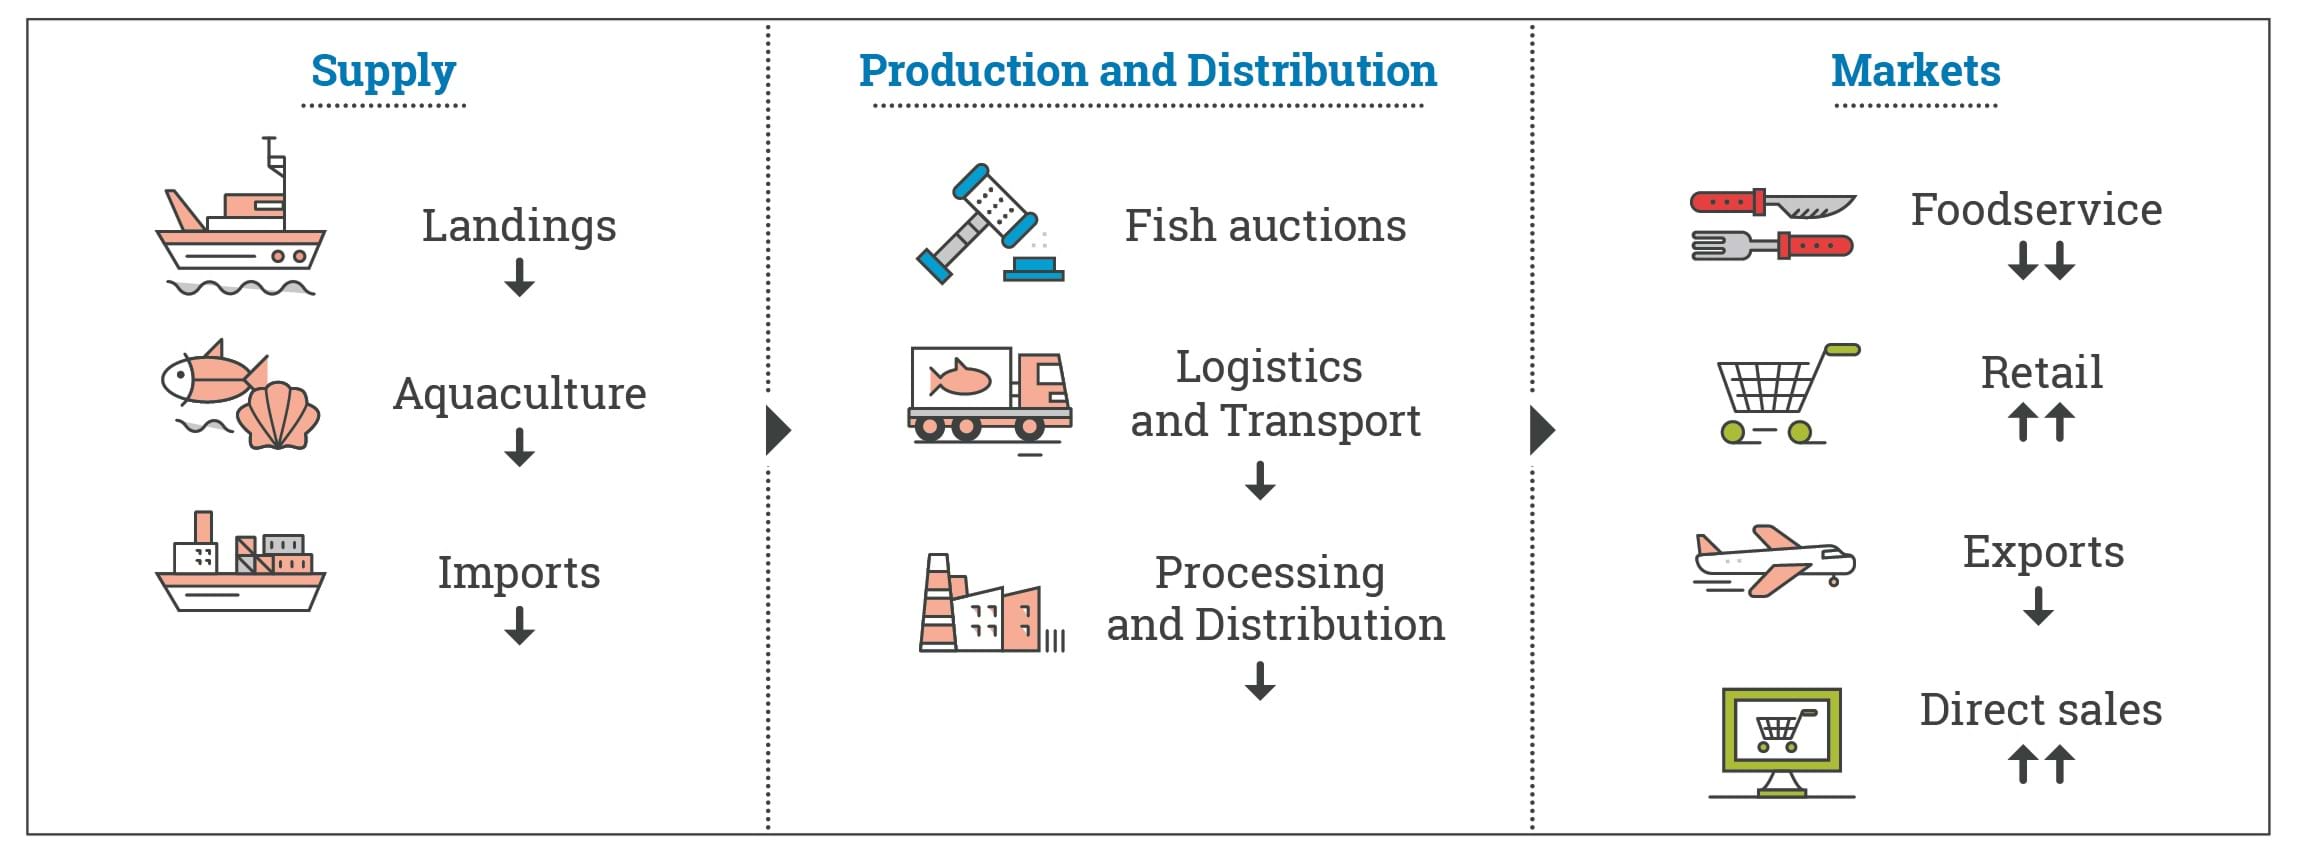 Diagram showing Covid-19 impacts on supply chain from October to December 2020, compared to same period in 2019 (as detailed below)